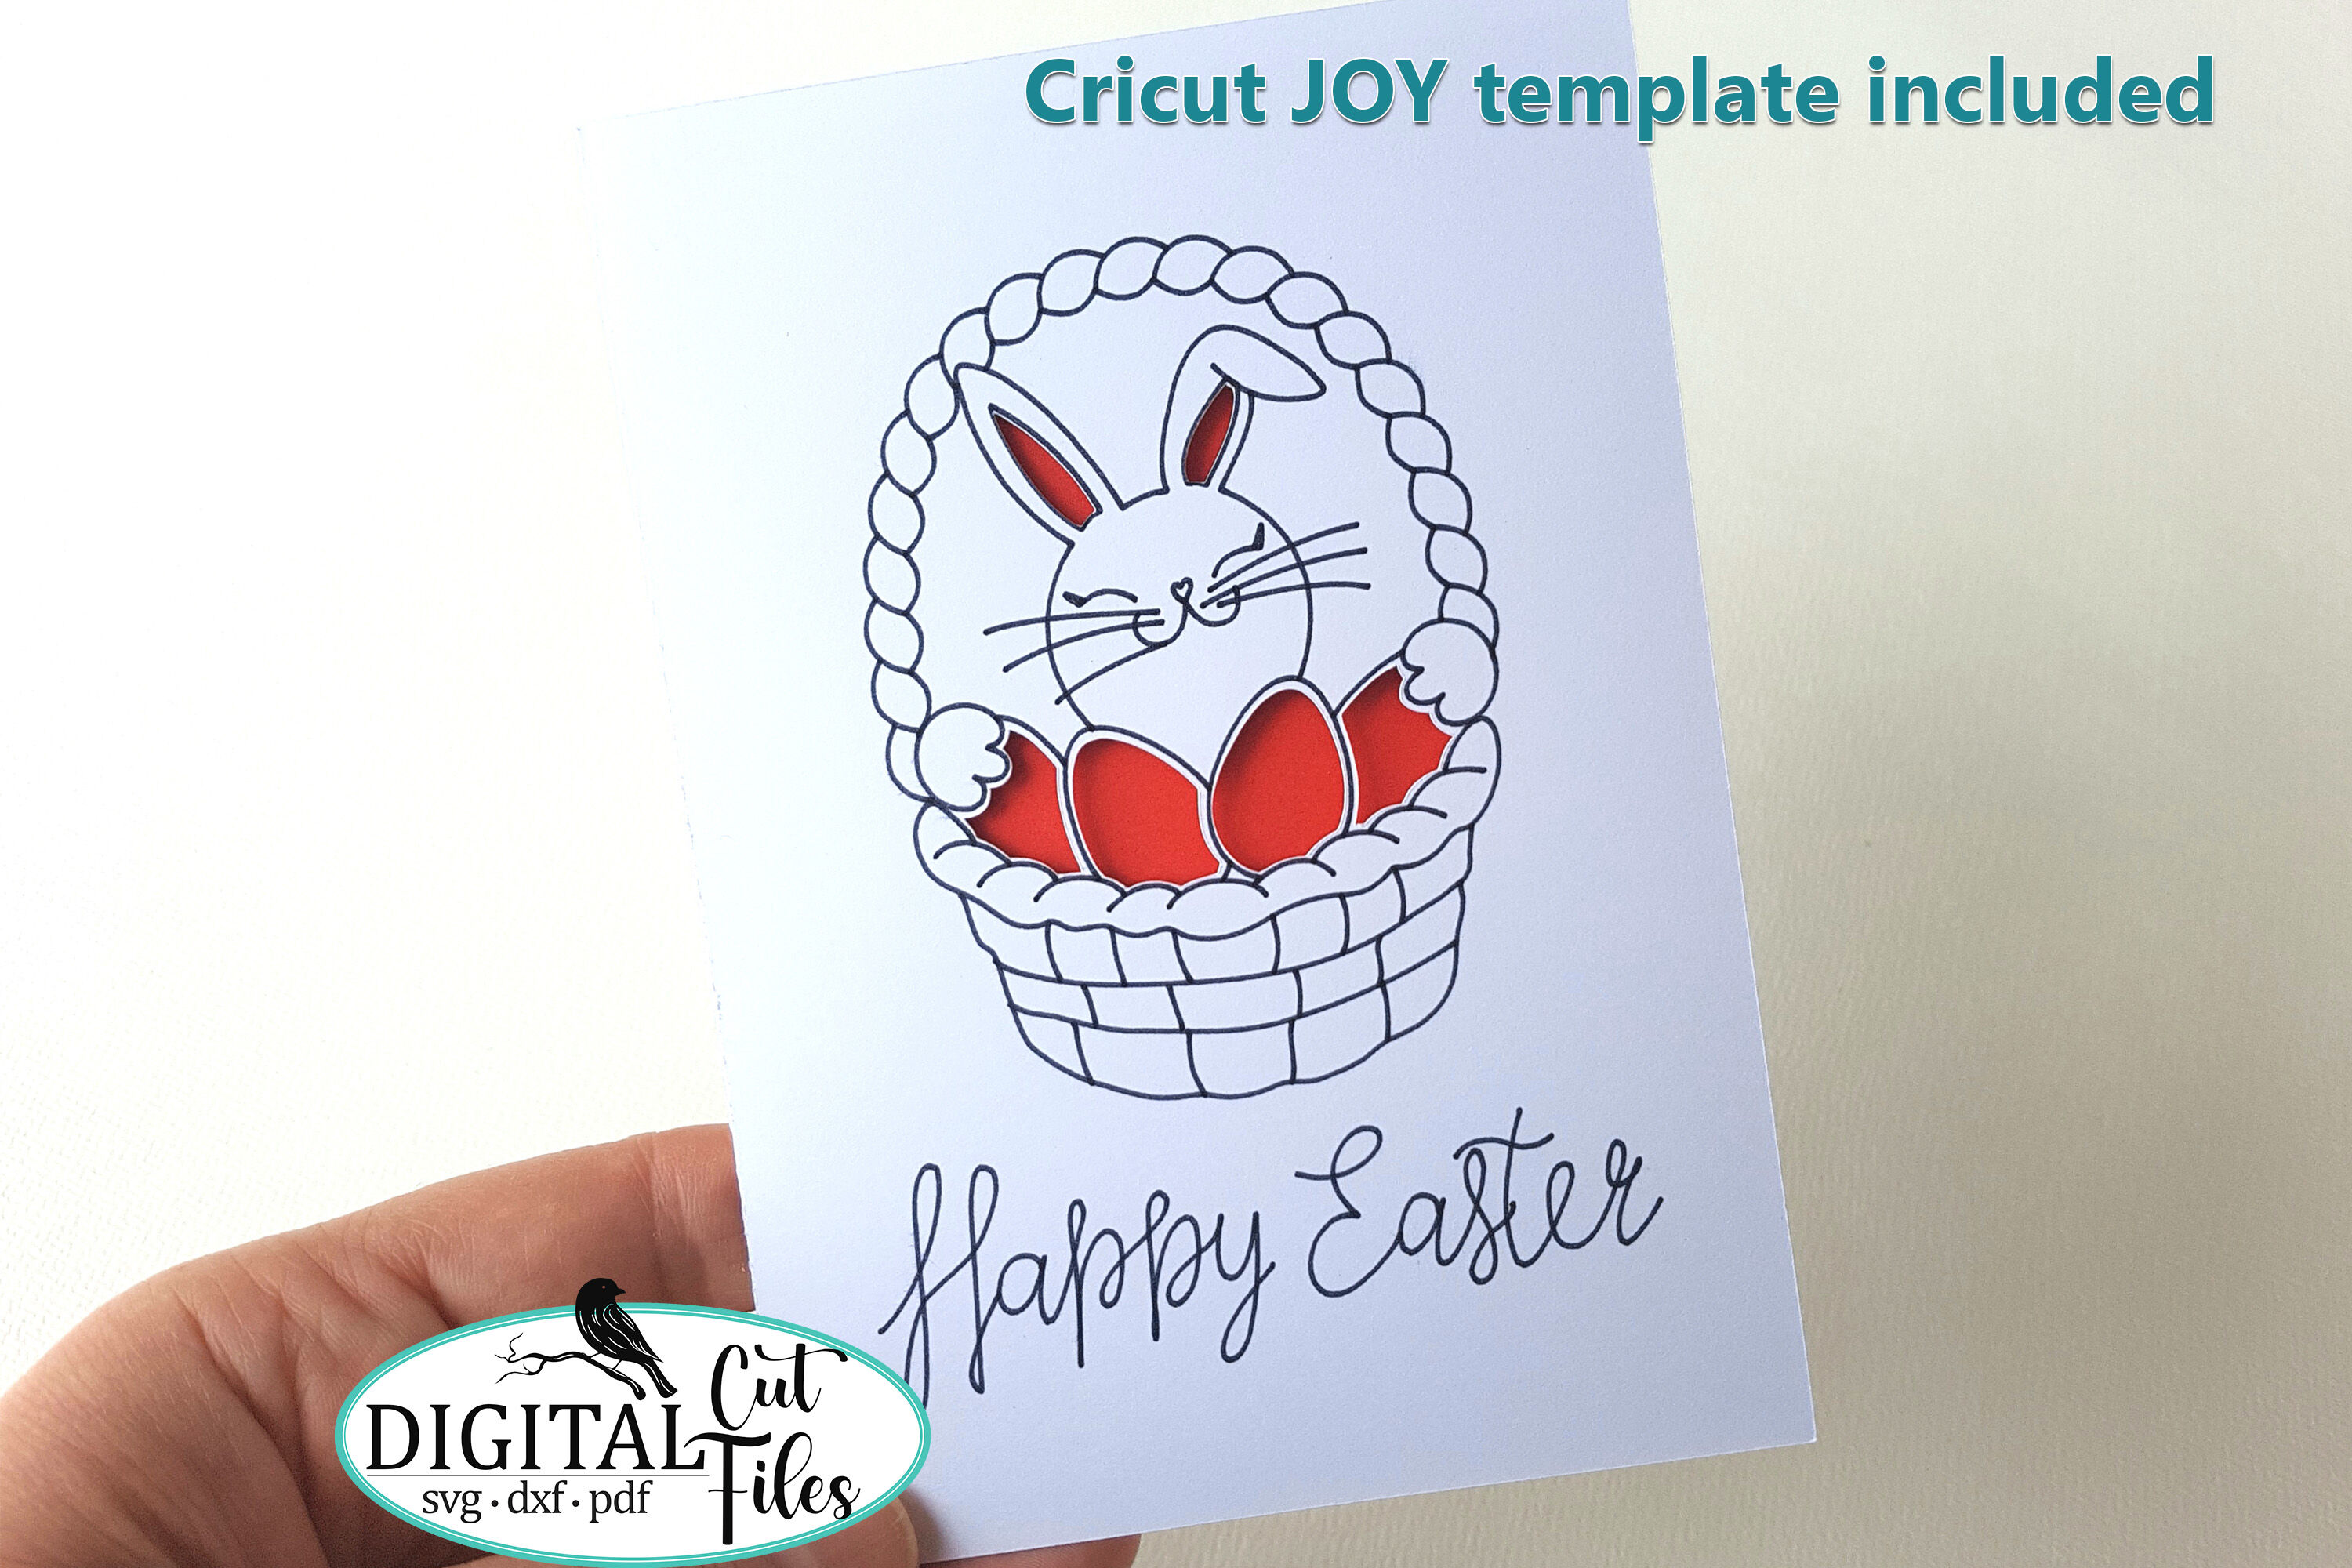 A Playful Stitch: What to do if your Cricut Joy Cards are Cutting